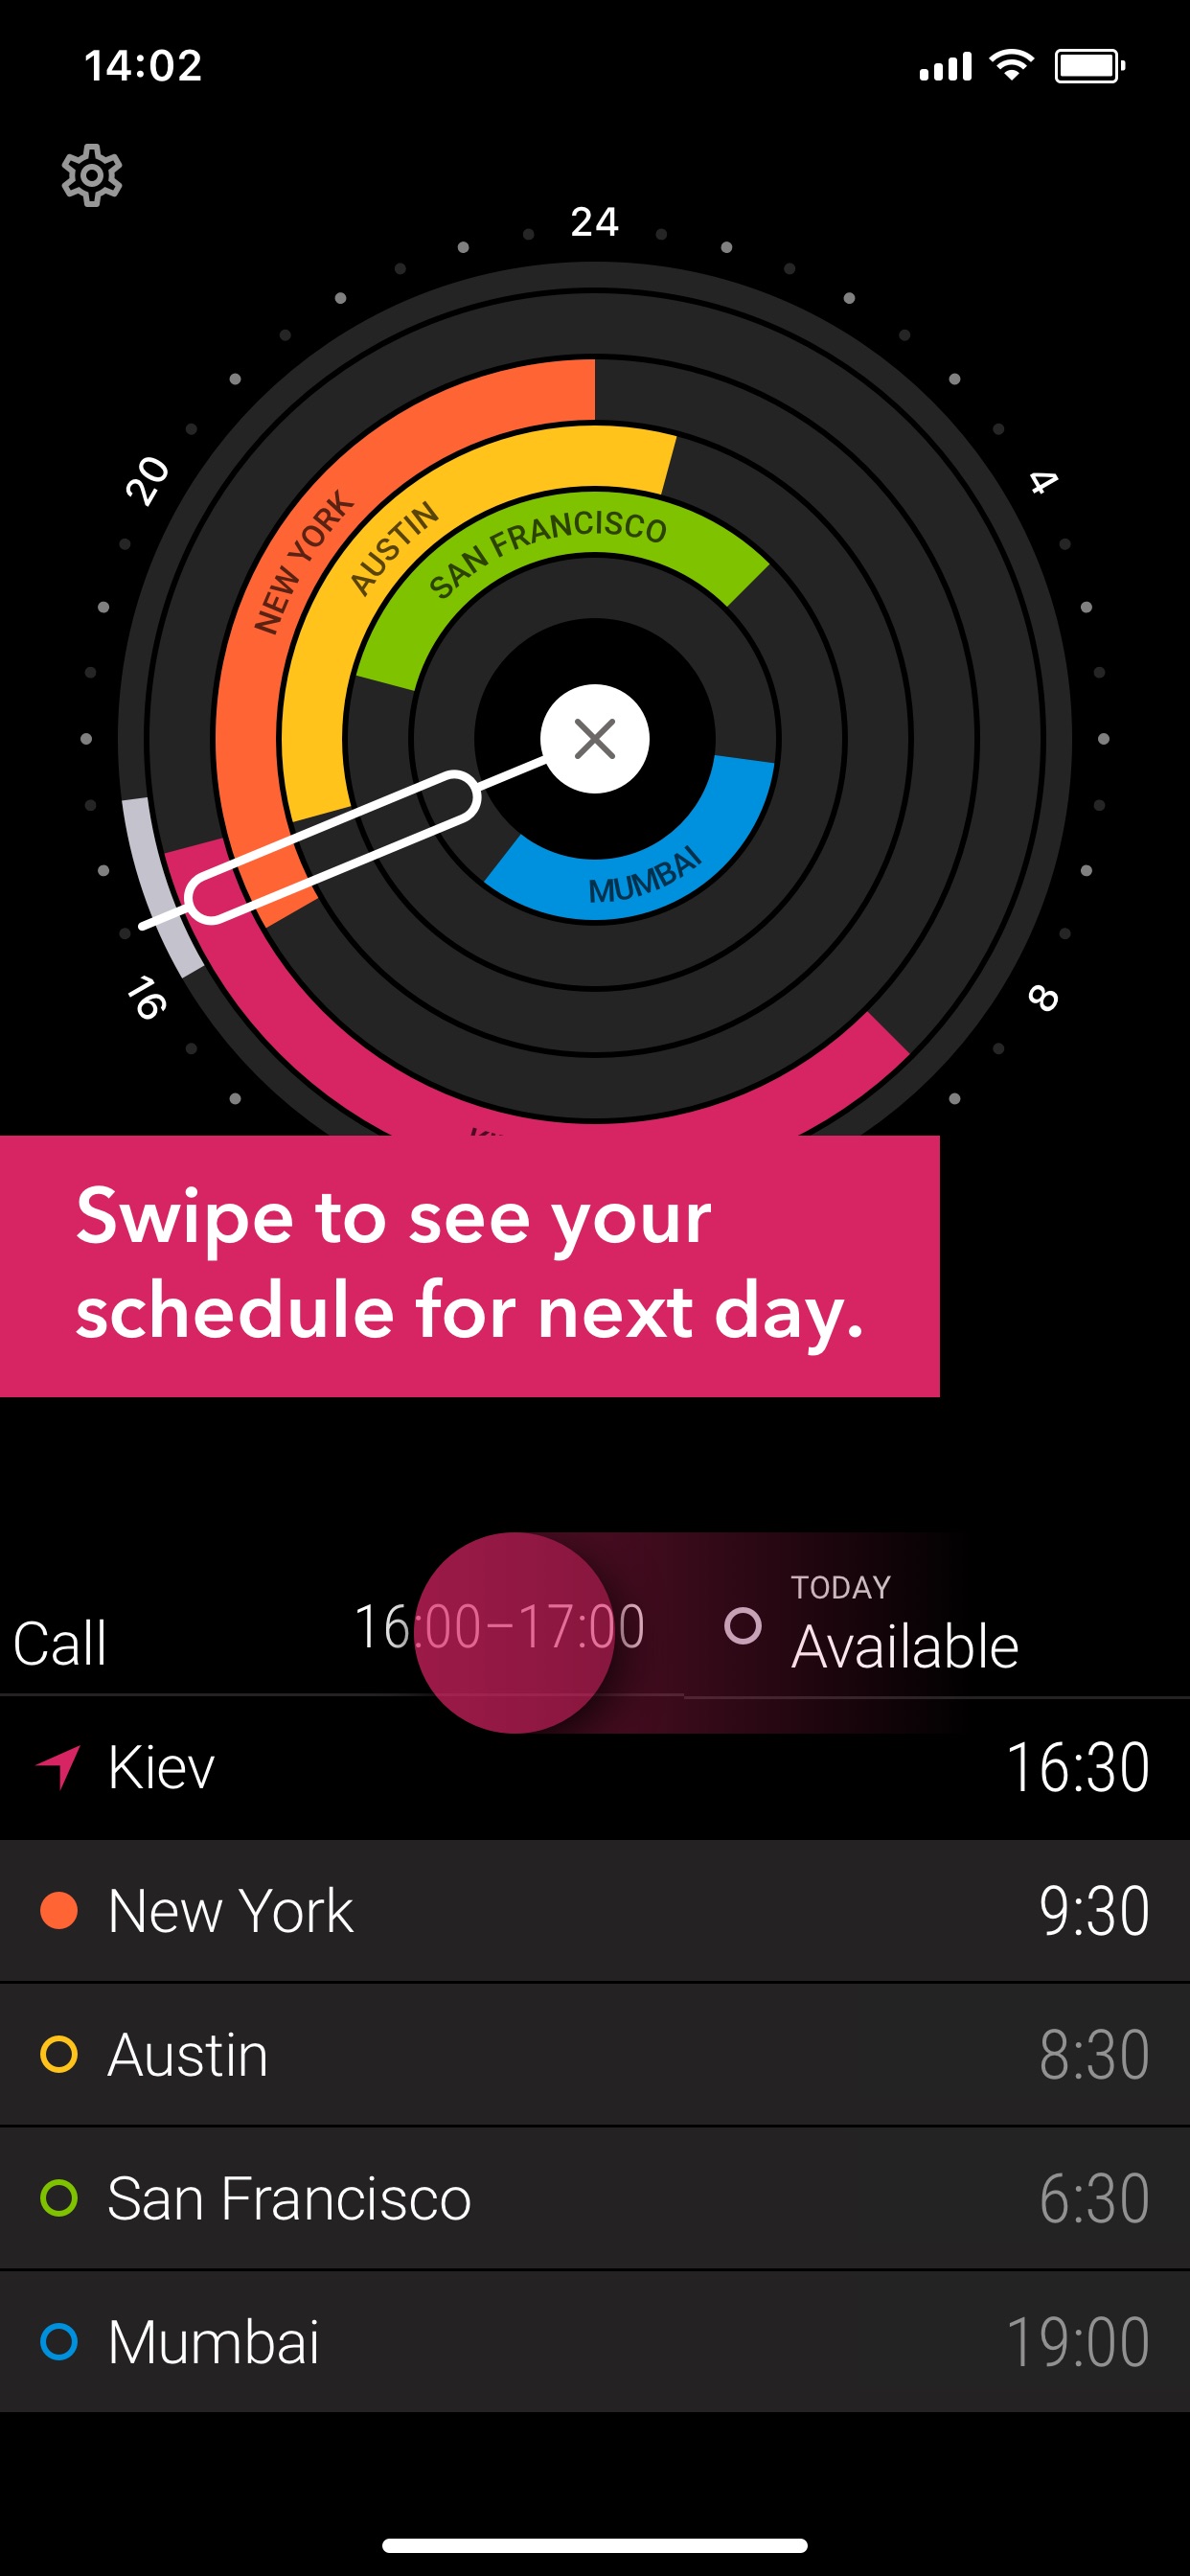 Swipe to see your schedule for next day.